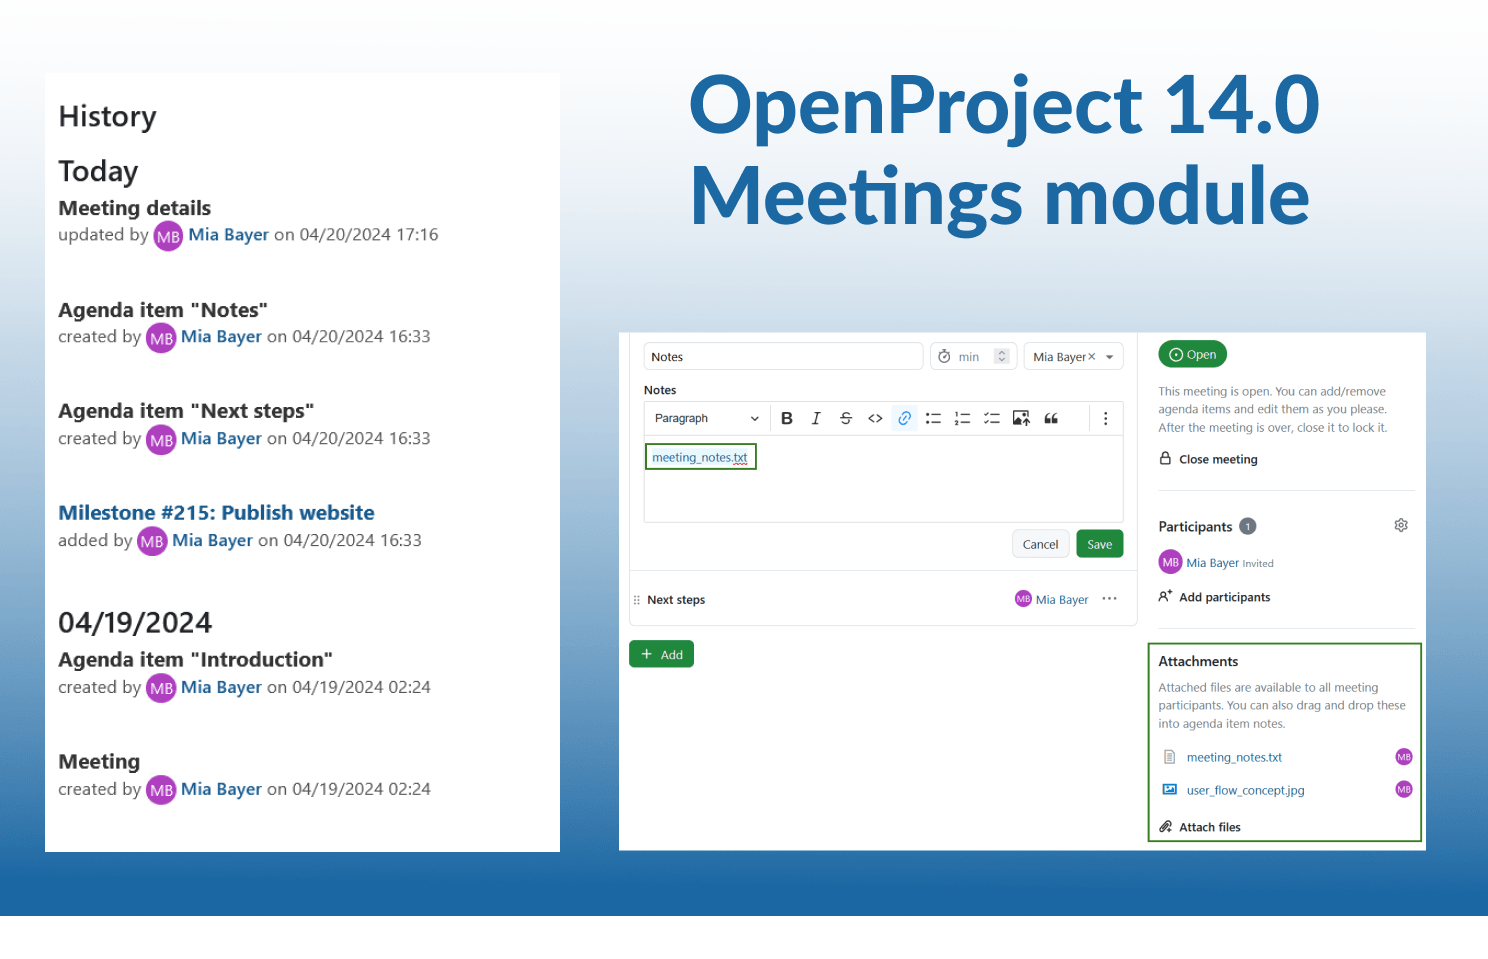 Screenshots for new features for OpenProject’s Meetings module